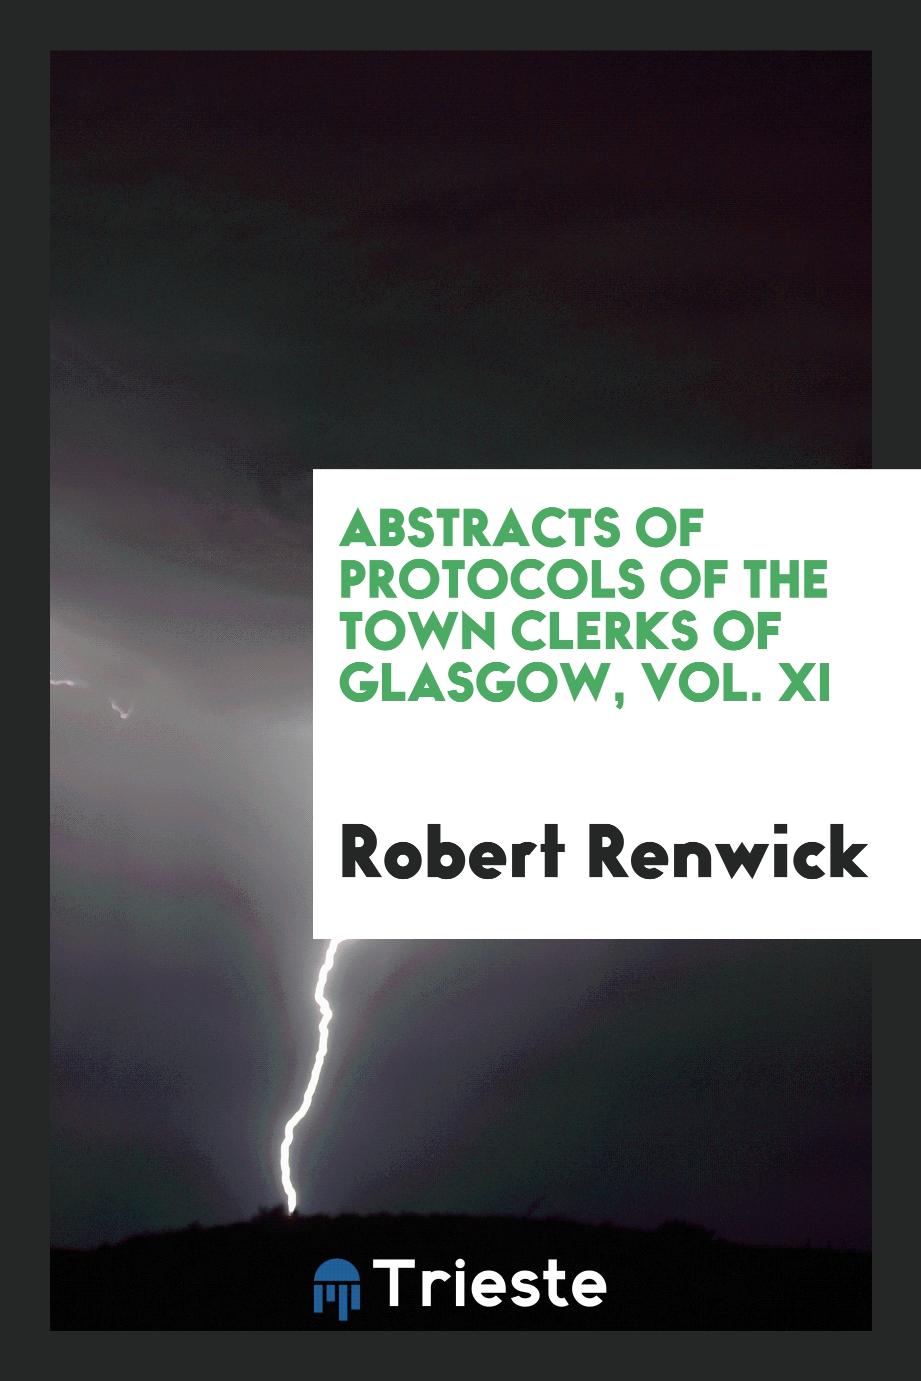 Abstracts of Protocols of the Town Clerks of Glasgow, Vol. XI